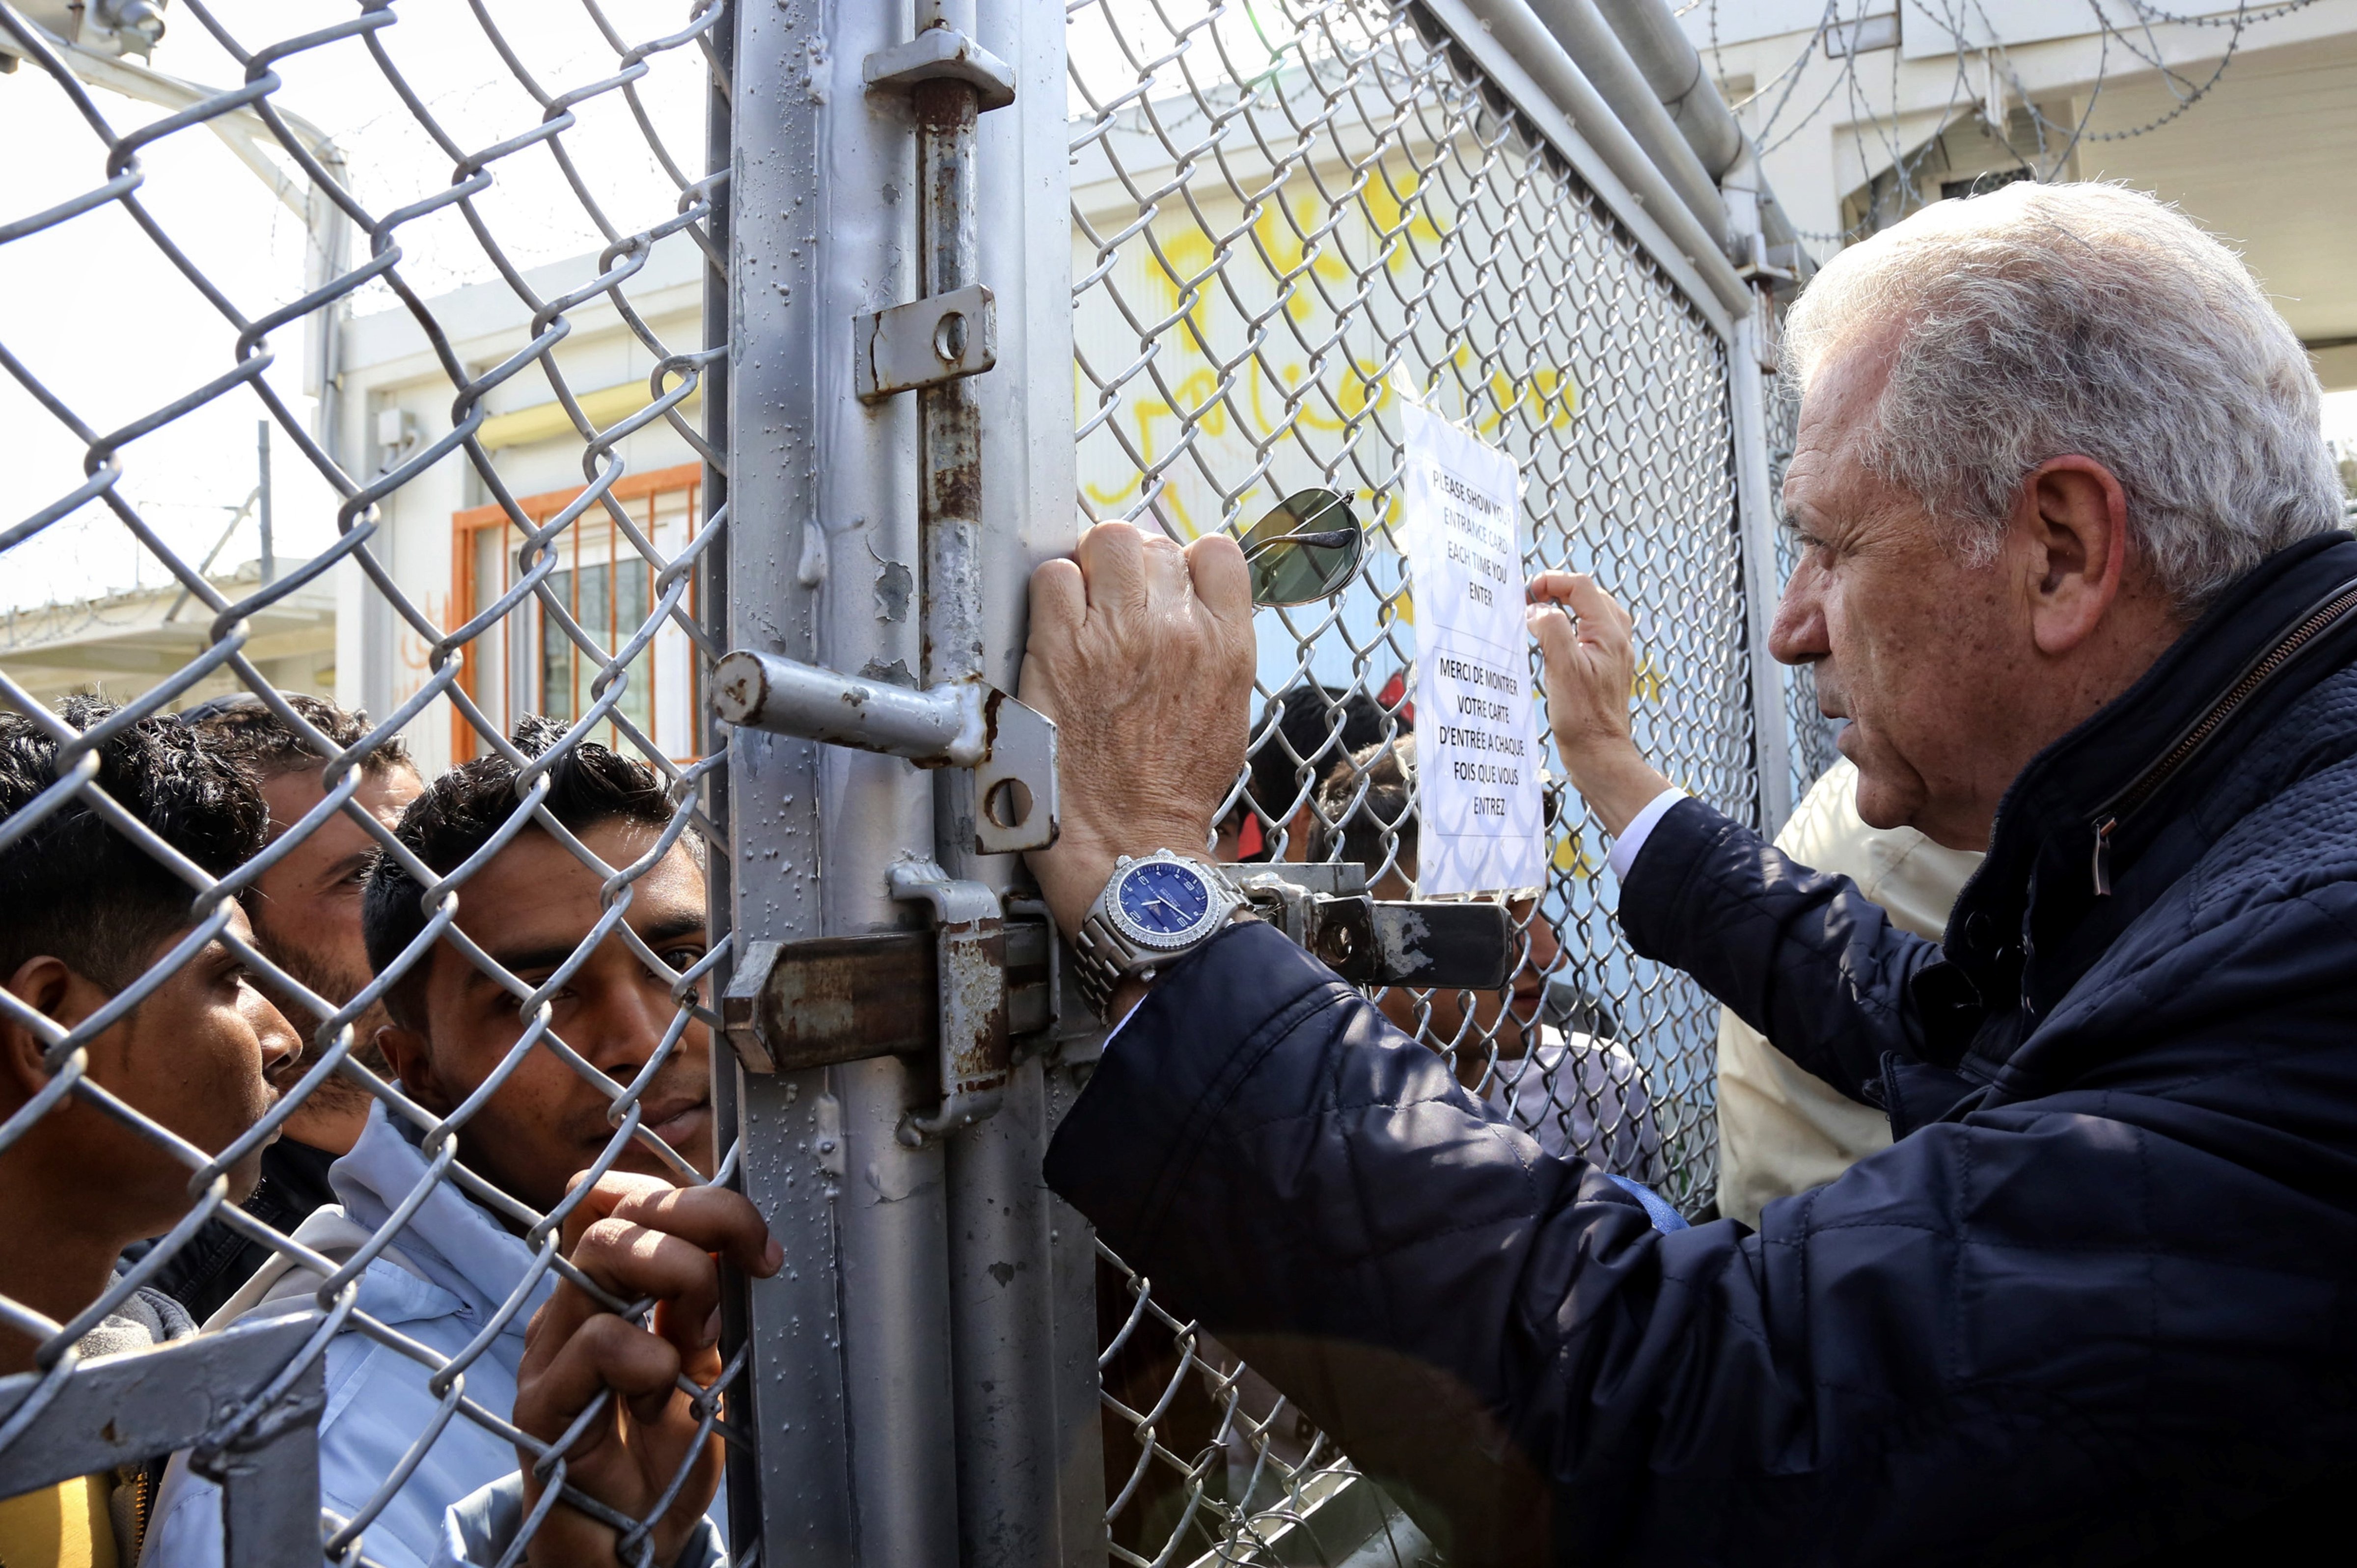 E.U. Migration Commissioner Dimitris Avramopoulos talks with migrants  during his visit to the  Moria migrant camp on March 16, 2017 on the island of Lesbos, almost a year after an EU-Turkey deal. (STRINGER—AFP/Getty Images)